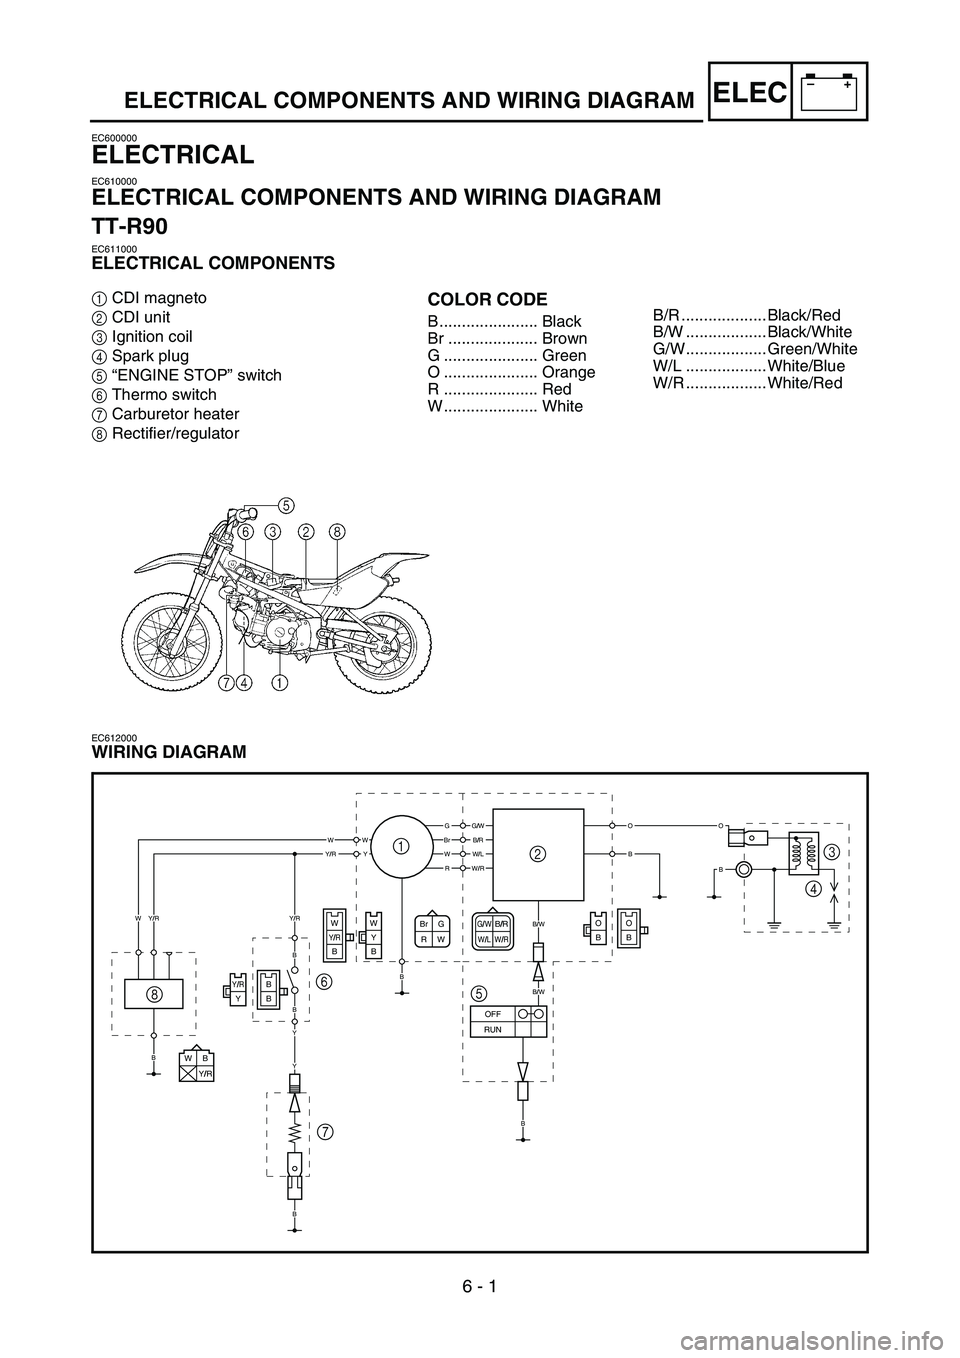 YAMAHA TTR90 2006  Owners Manual 6 - 1
–+ELECELECTRICAL COMPONENTS AND WIRING DIAGRAM
EC600000
ELECTRICAL
EC610000
ELECTRICAL COMPONENTS AND WIRING DIAGRAM
TT-R90
EC611000
ELECTRICAL COMPONENTS
1CDI magneto
2CDI unit
3Ignition coil